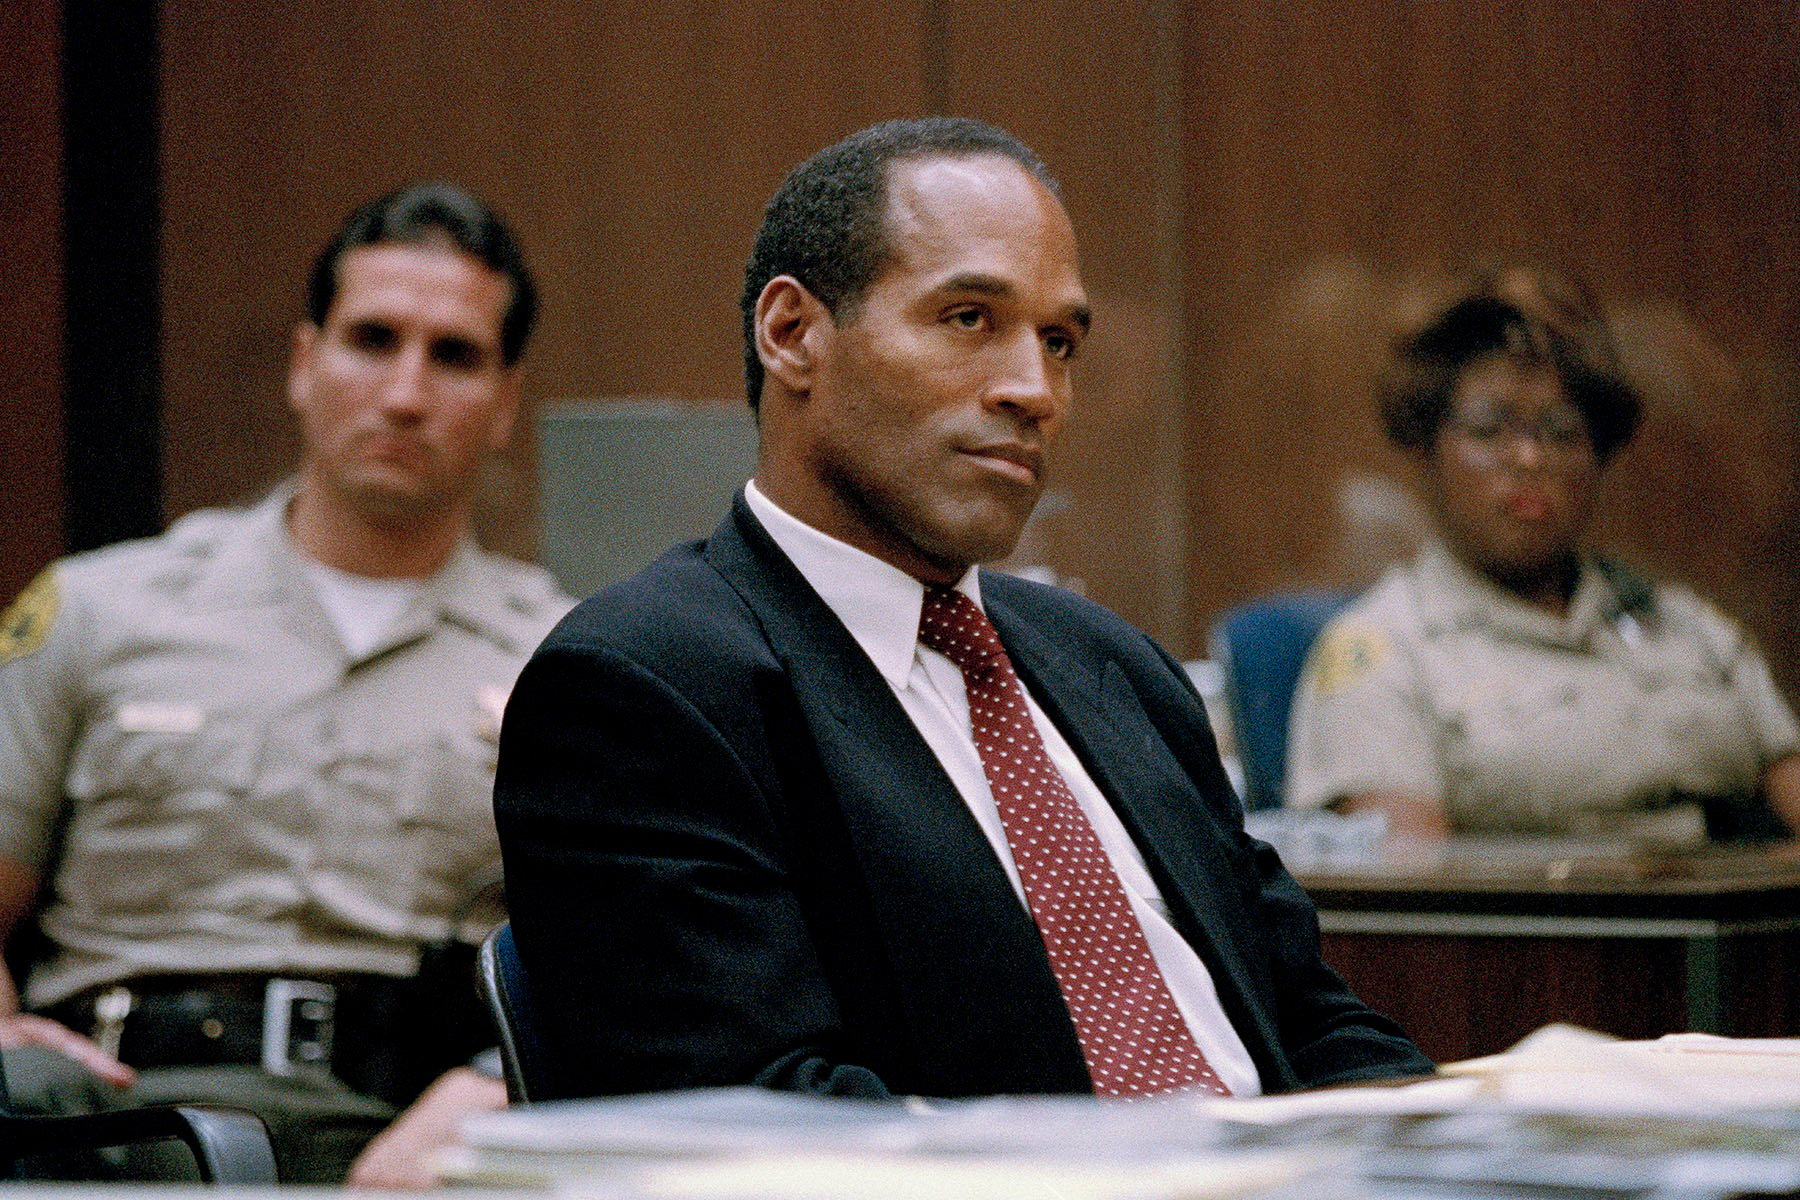 O.J. Simpson smiles slightly as he appears in Los Angeles County Superior Court for his preliminary hearing.